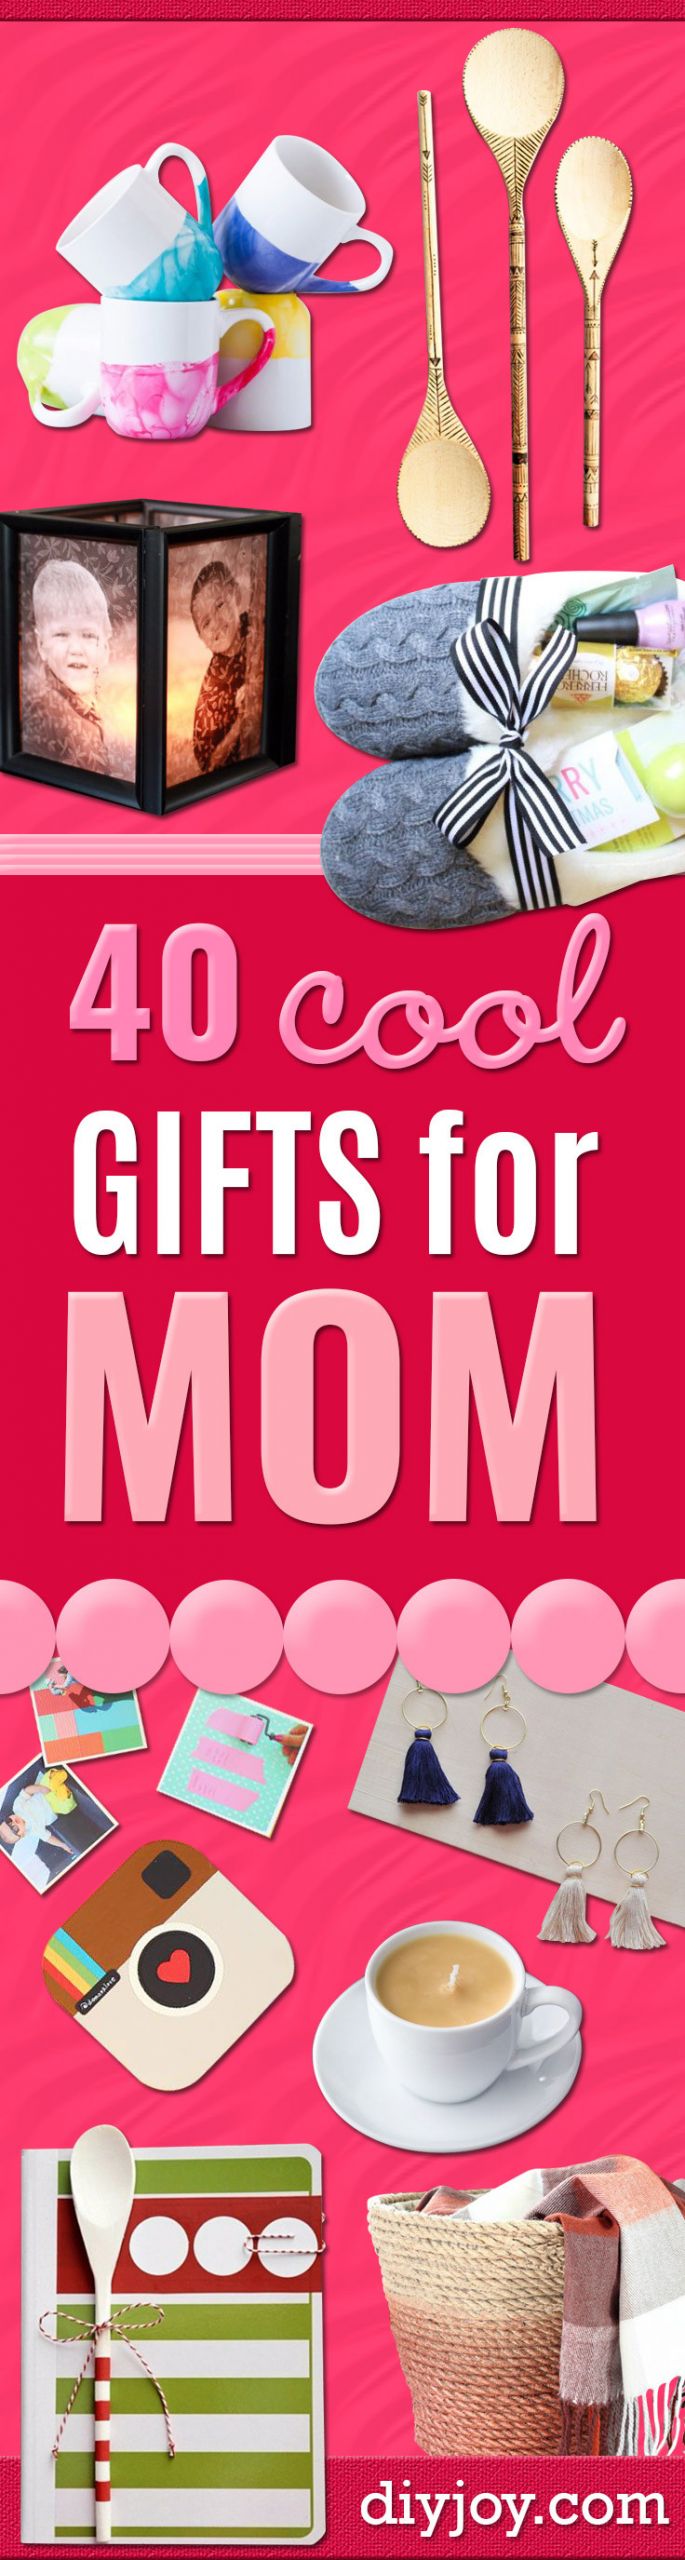 Holiday Gift Ideas Moms
 40 Coolest Gifts To Make for Mom